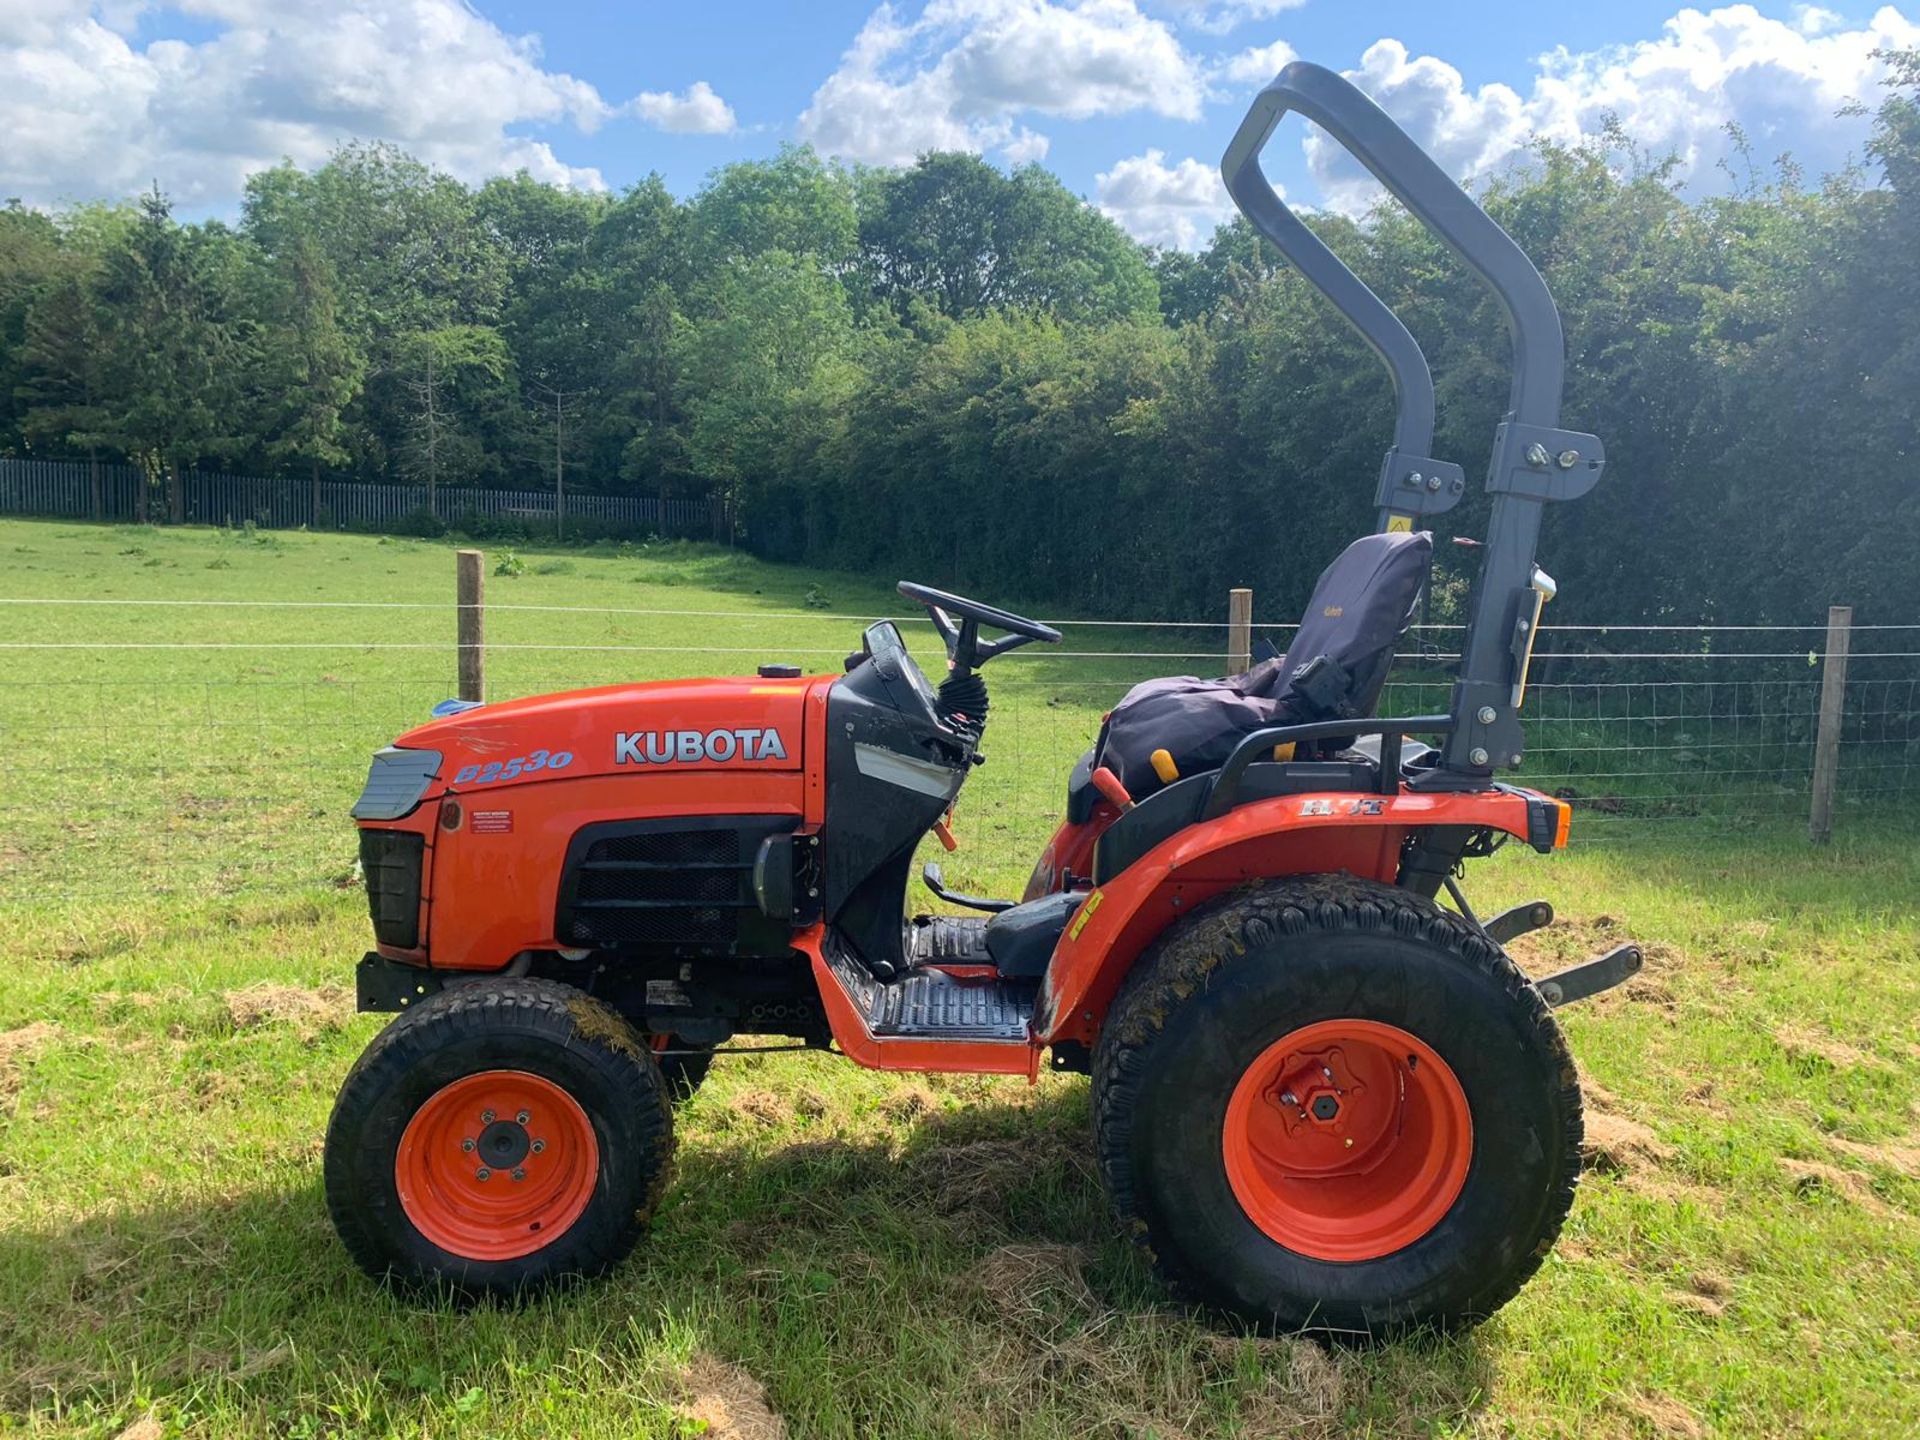 2017/17 REG KUBOTA B2530 COMPACT TRACTOR, RUNS AND WORKS, SHOWING 1989 HOURS *PLUS VAT* - Image 3 of 13